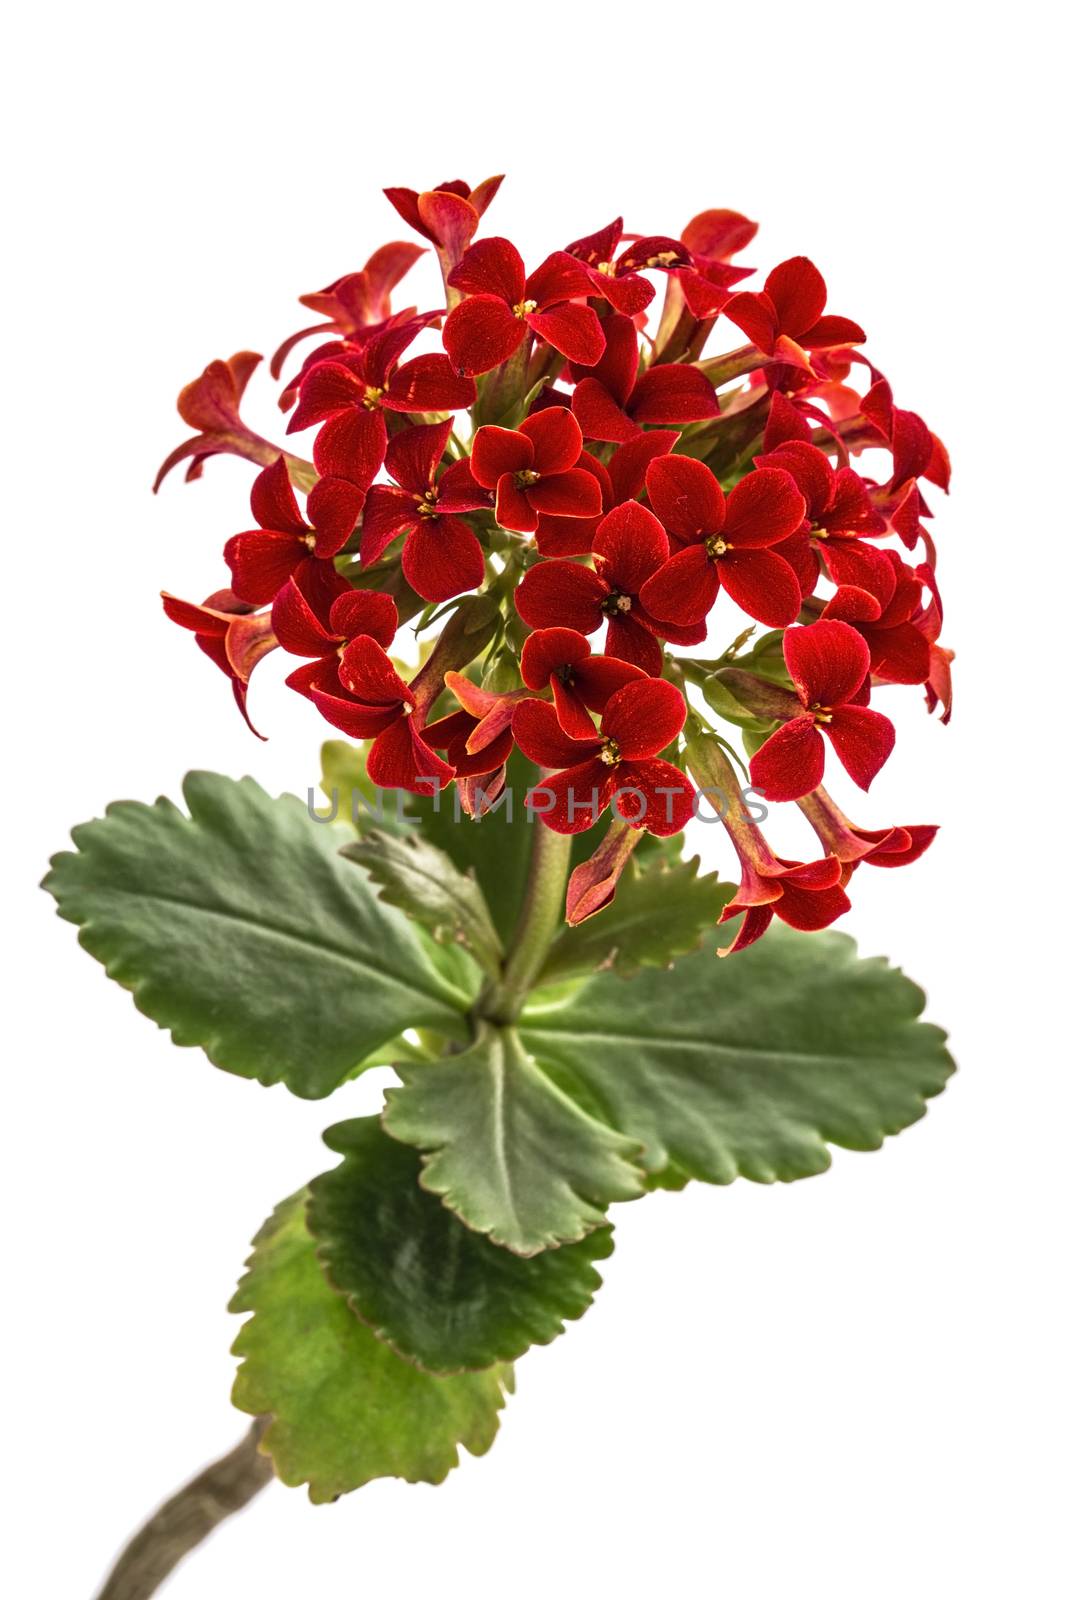 Flower Kalanchoe, tropical succulent, isolated on white background